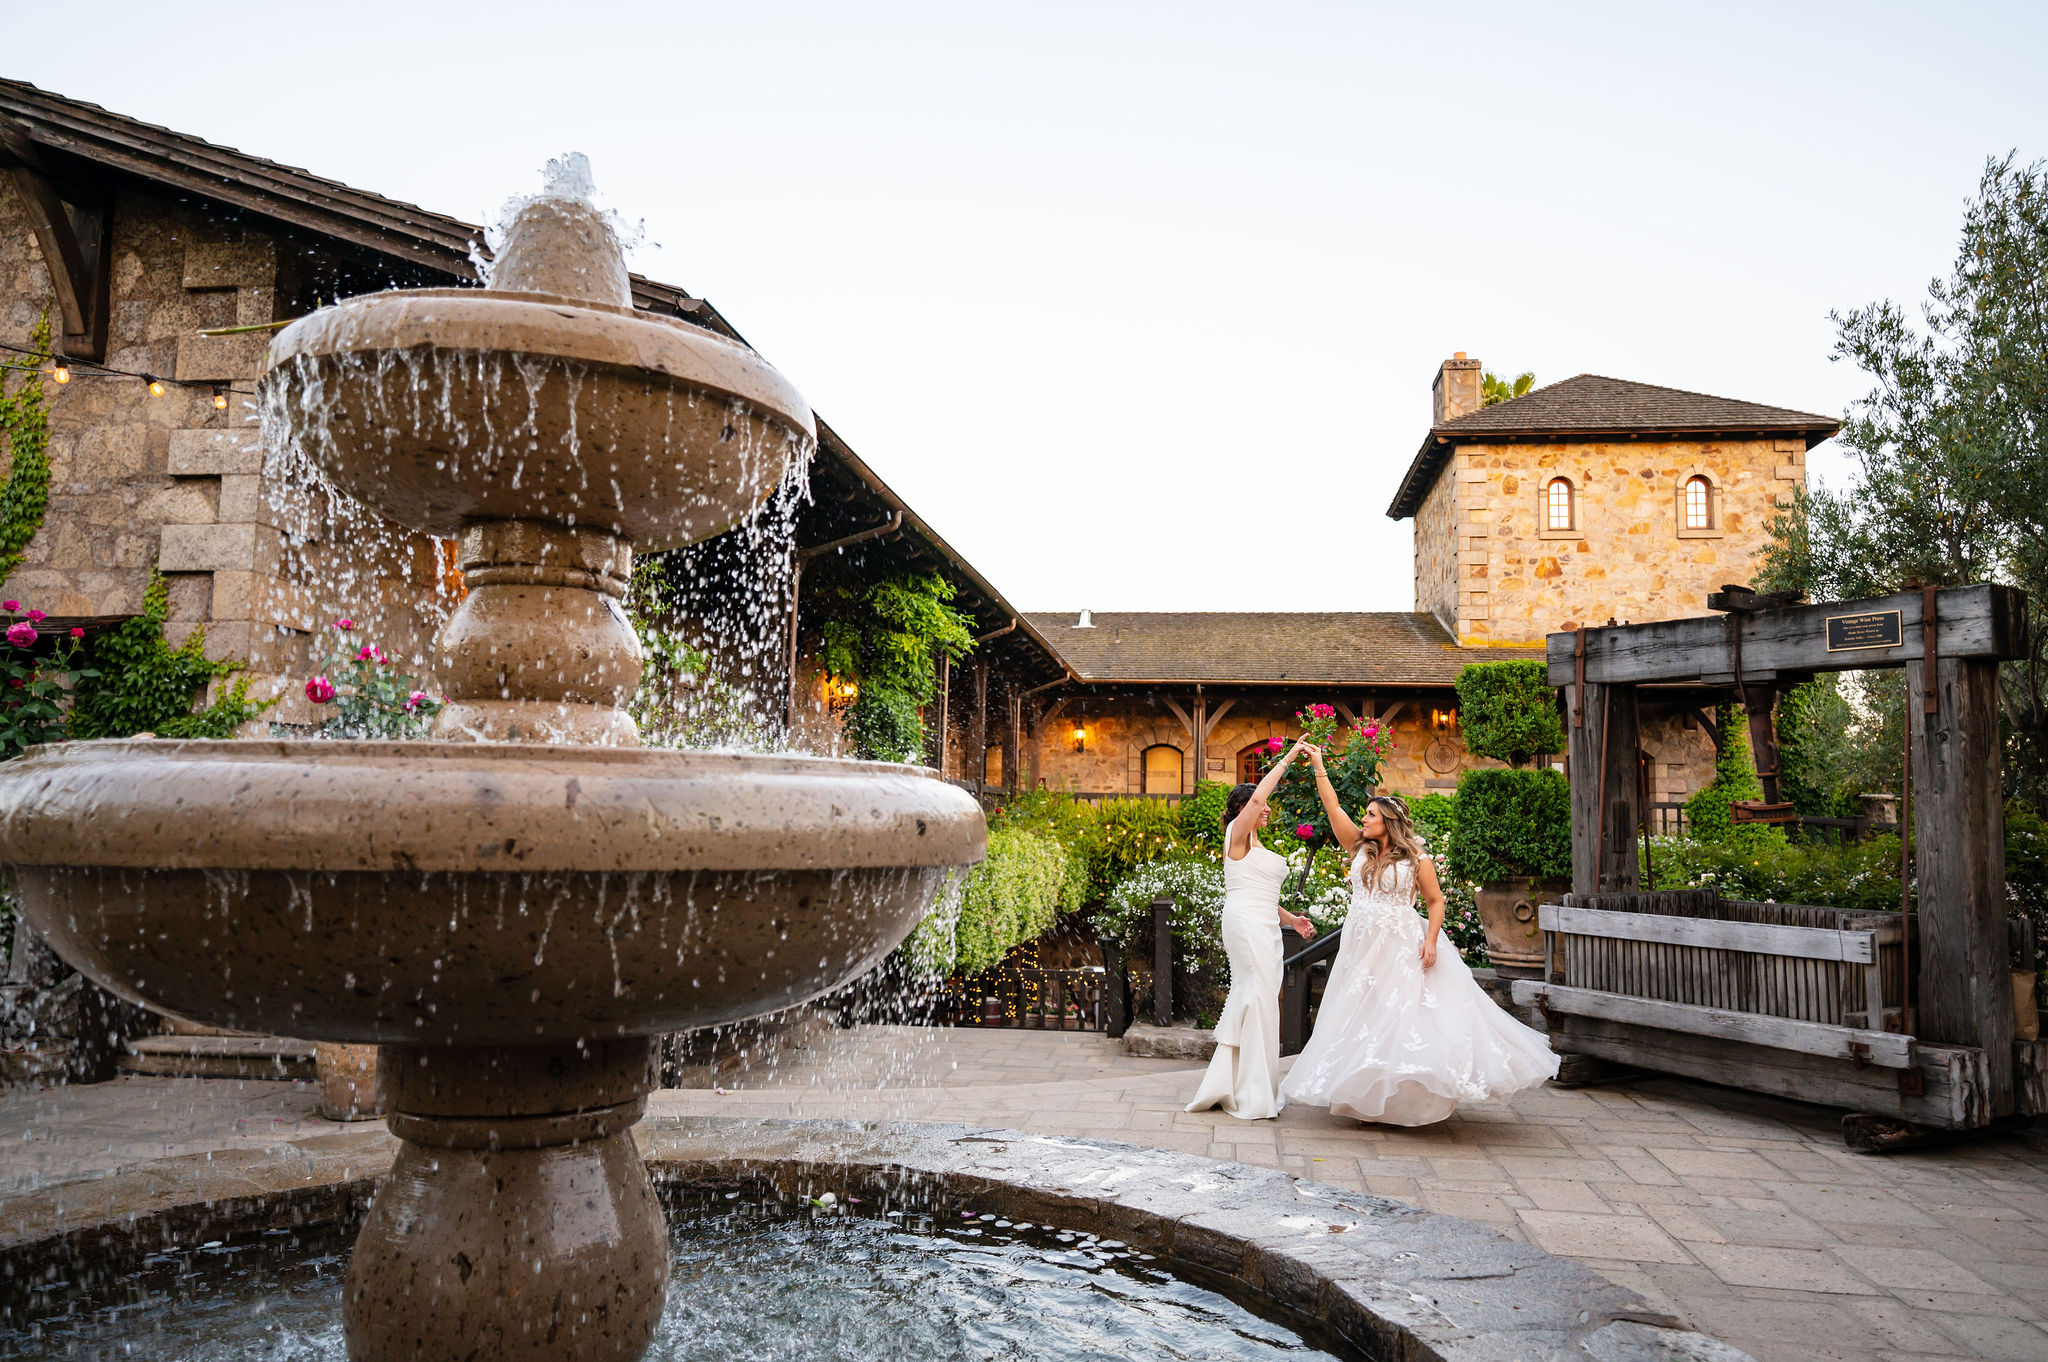 Emma & Shannon ~ A Music Lovers Dream at V. Sattui Winery